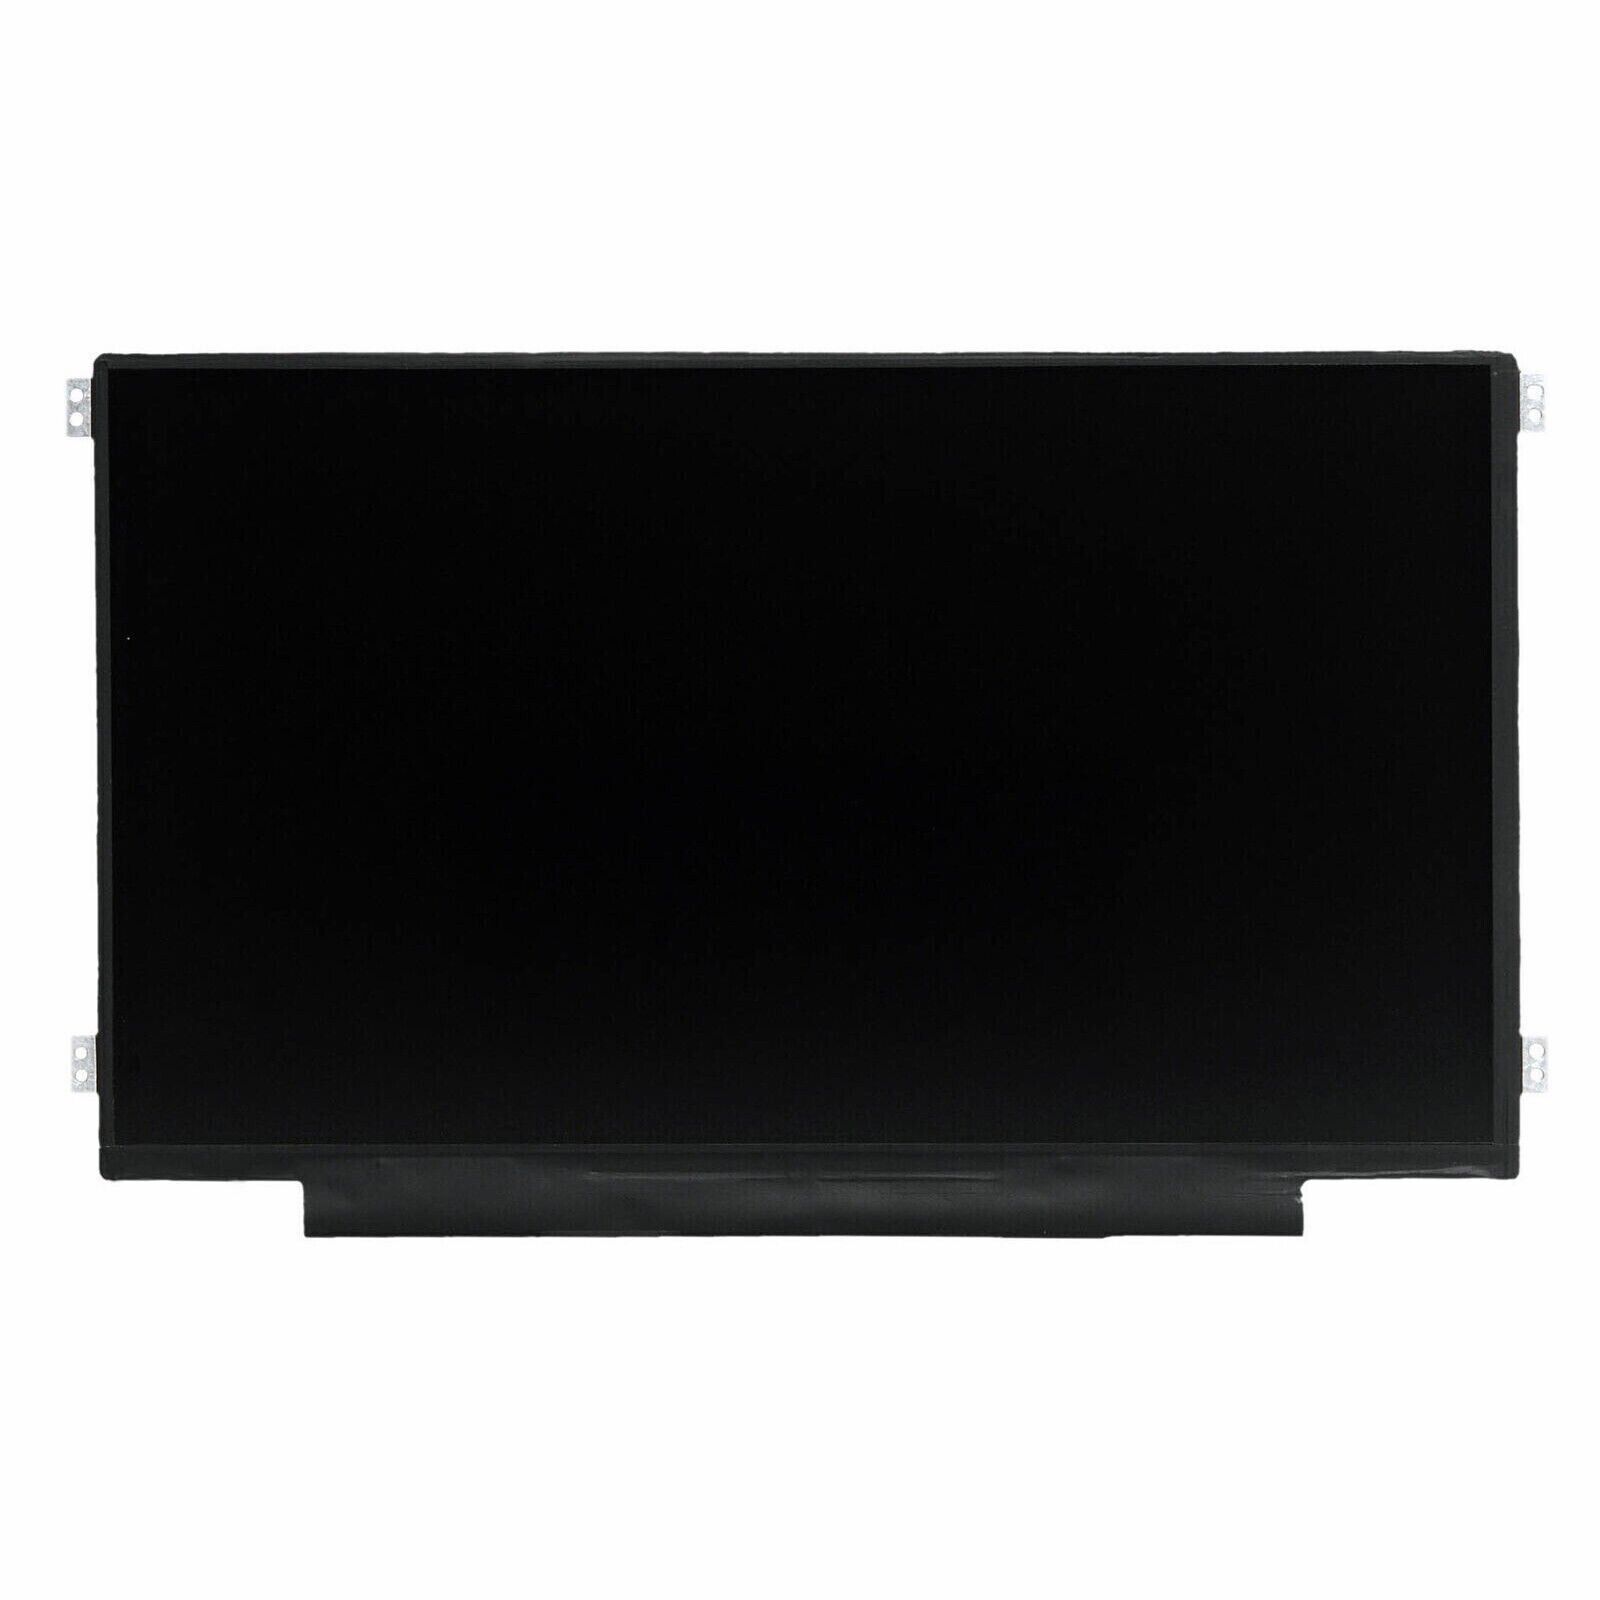 For SAMSUNG CHROMEBOOK 2 XE500C12 LCD SCREEN 11.6\